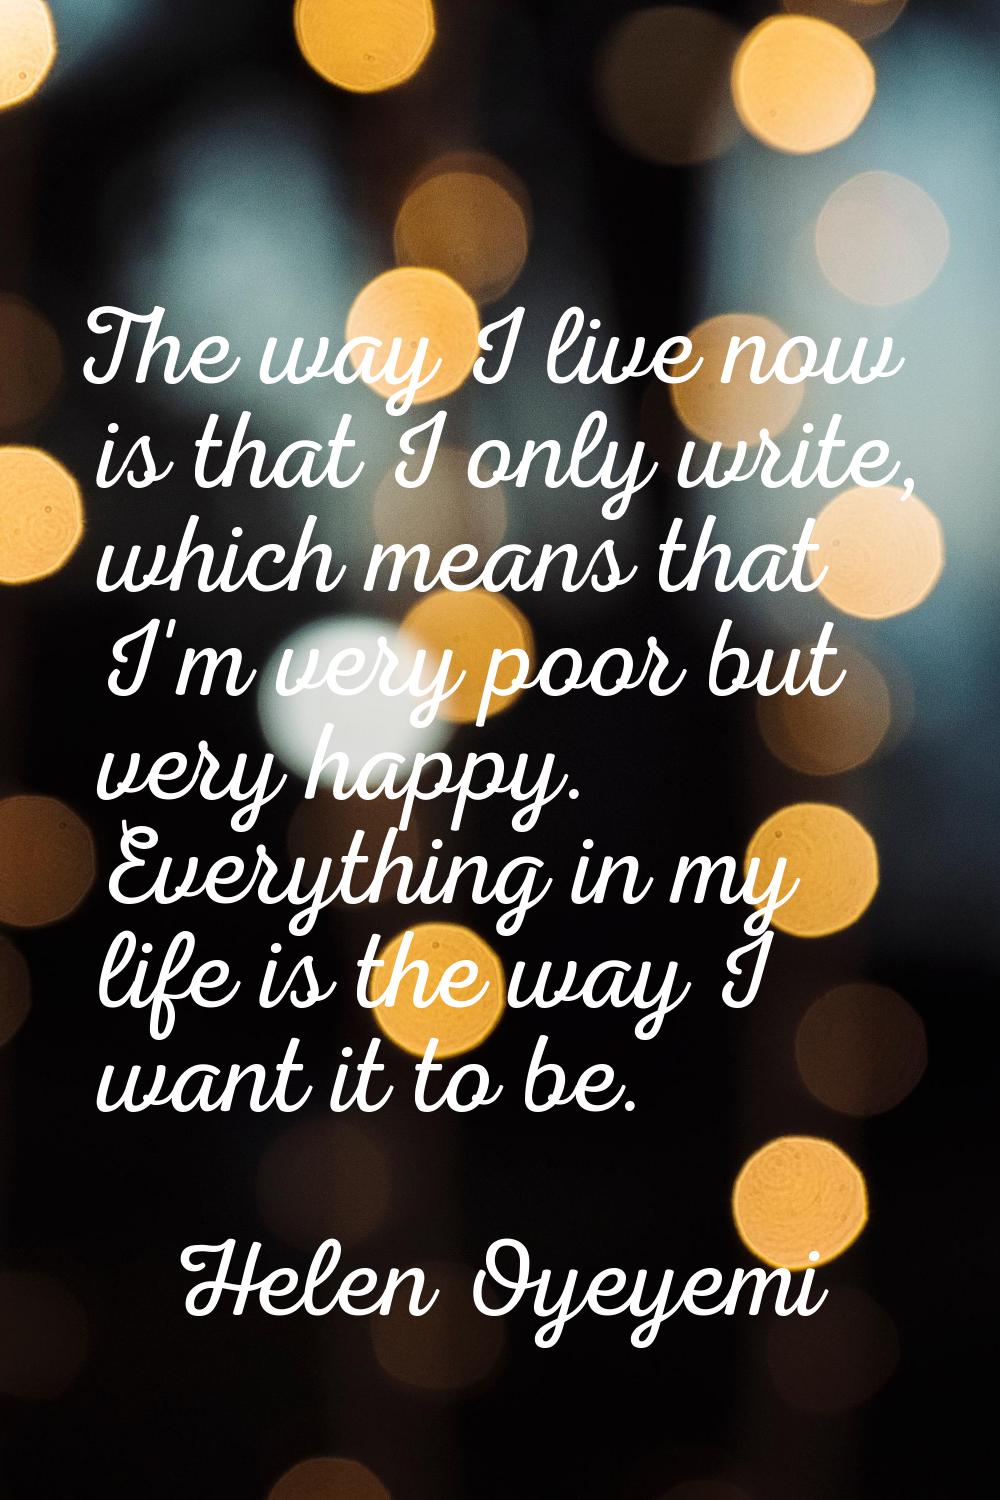 The way I live now is that I only write, which means that I'm very poor but very happy. Everything 